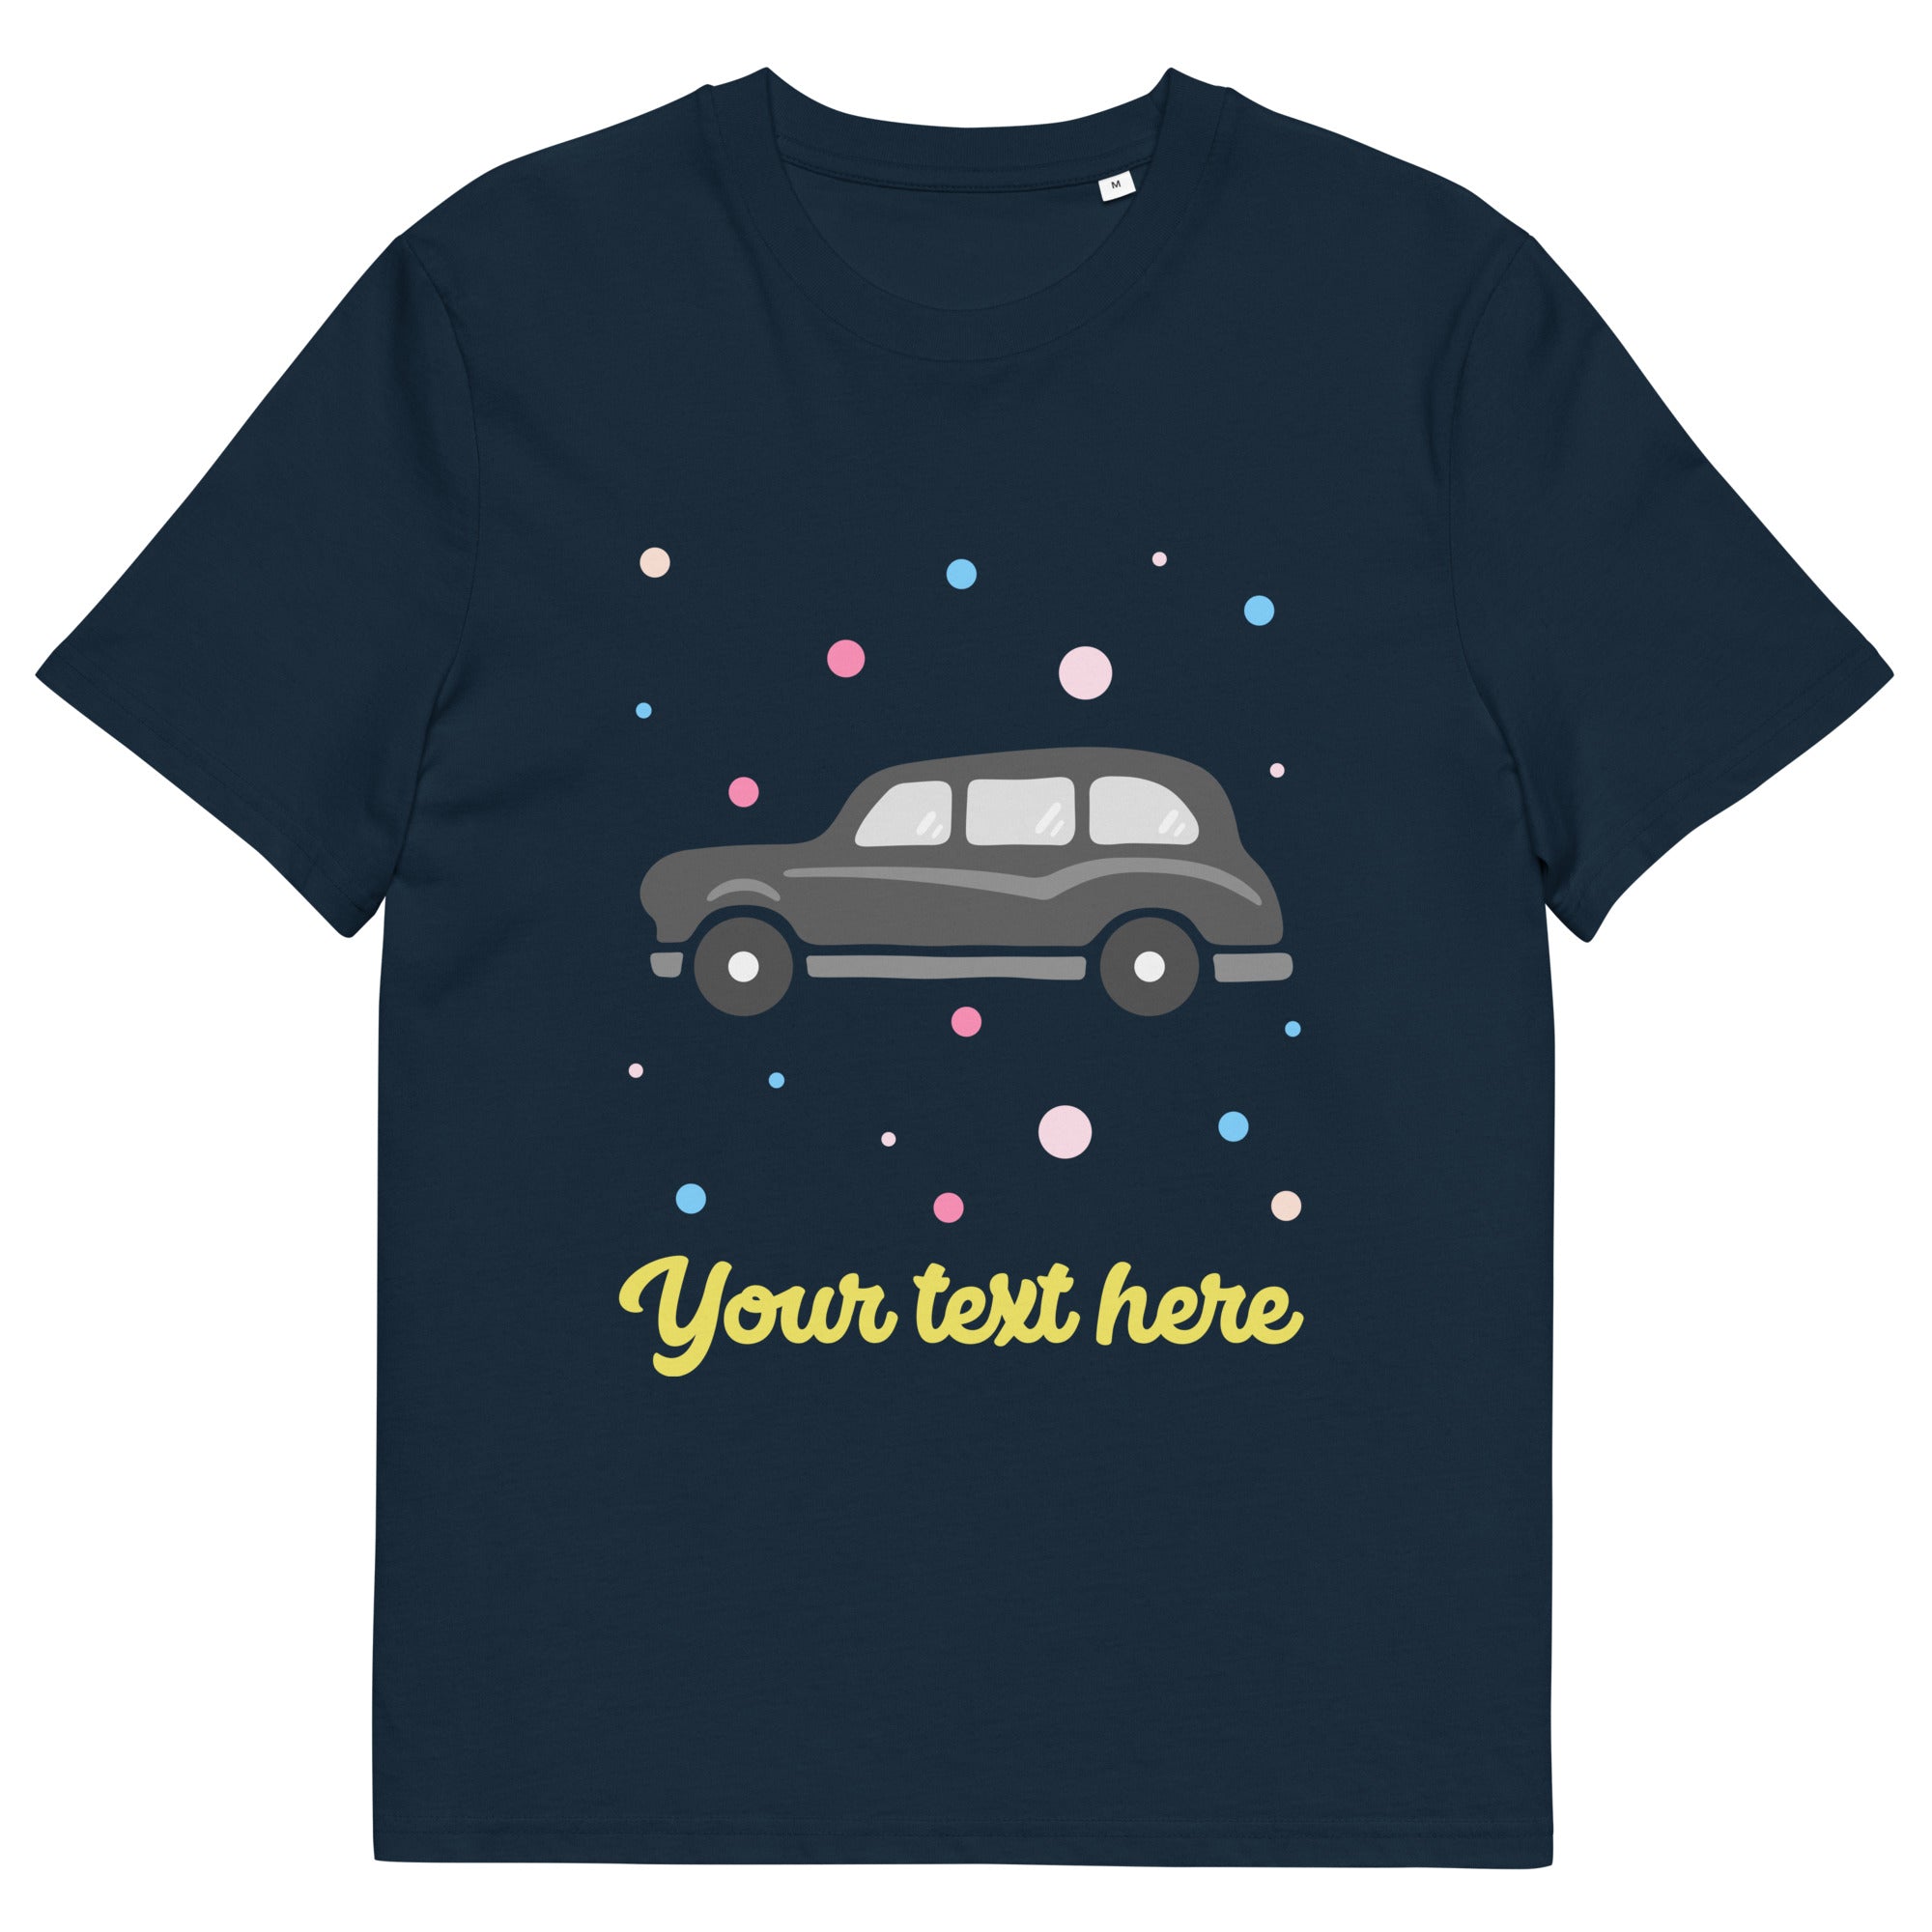 Personalised Custom Text - Organic Cotton Adults Unisex T-Shirt - London Doodles - Black Taxi - Navy